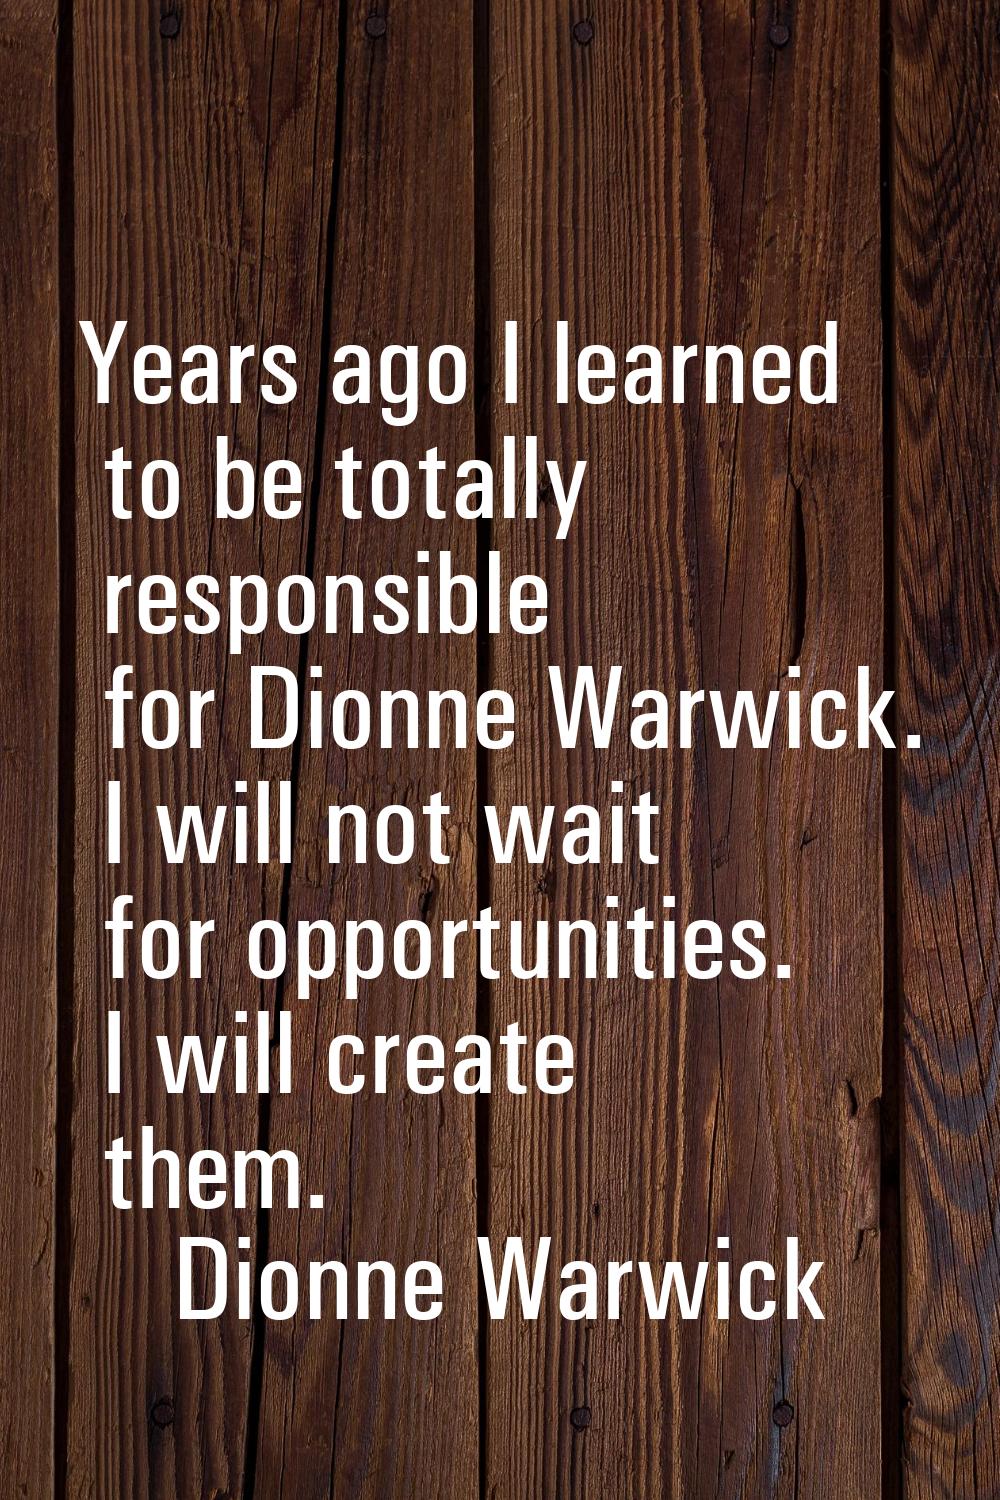 Years ago I learned to be totally responsible for Dionne Warwick. I will not wait for opportunities